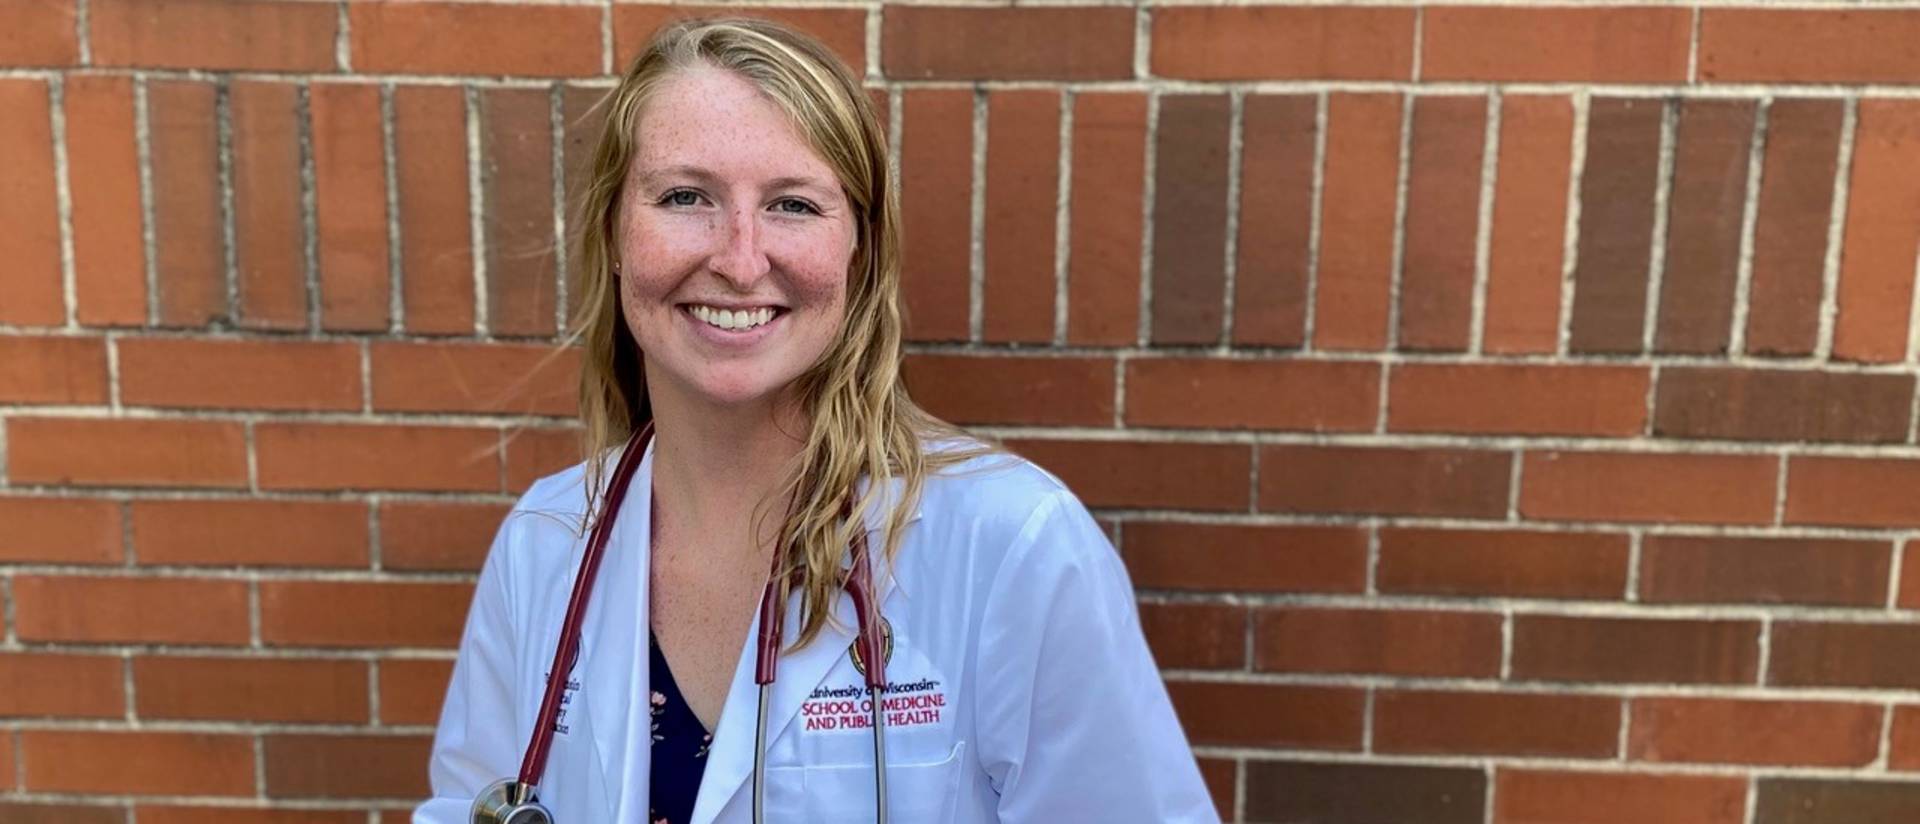 Encouragement from her UW-Eau Claire instructors prompted Hannah Van Steenburgh to switch her major from nursing to biology. Now she’s a first-year student at the University of Wisconsin School of Medicine and Public Health.